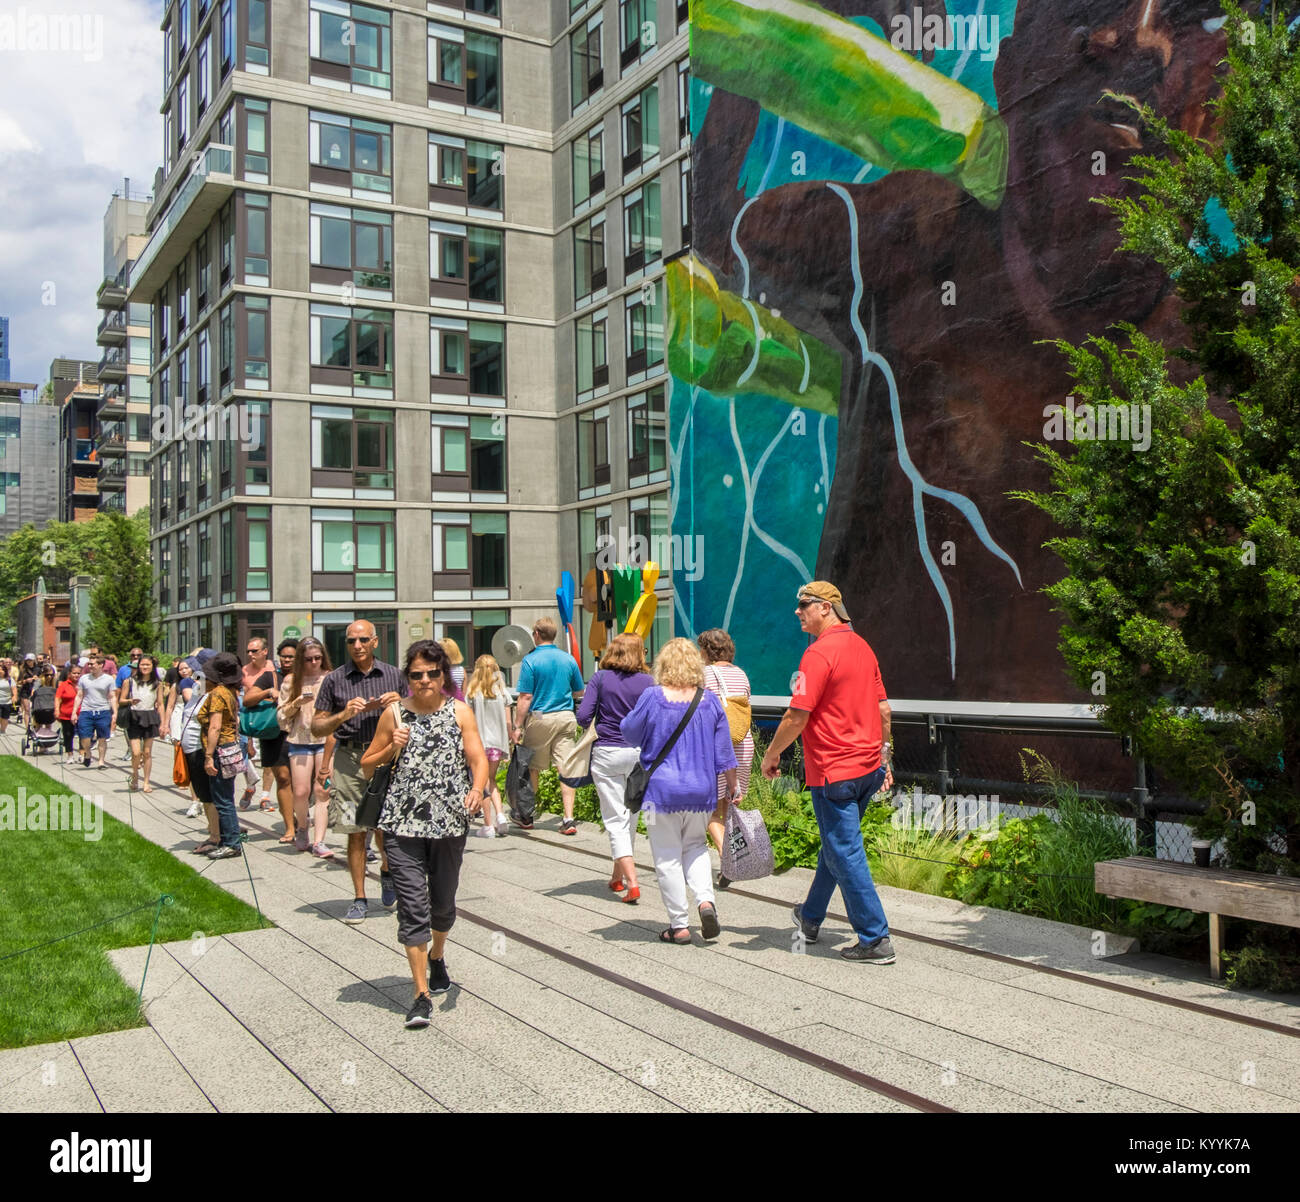 High Line New York or highline, an elevated park with tourists and people walking, Manhattan, New York City, USA Stock Photo